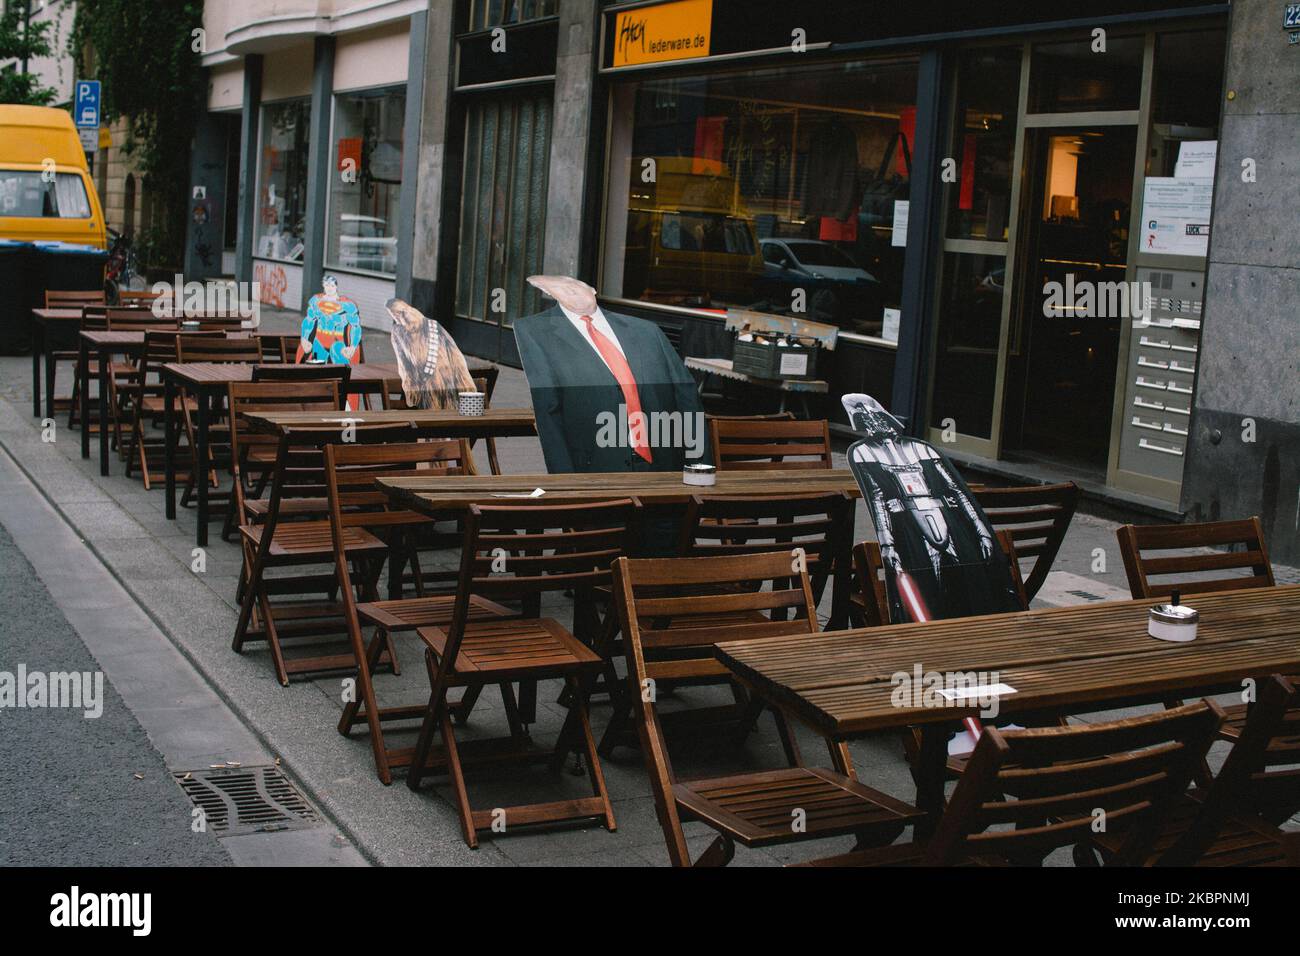 Cardboard cutouts of trump and other film figures sat in between the seats outside of a cafe which helps diners feel social distance, in Leverkusen, Germany, on June 3, 2020. (Photo by Ying Tang/NurPhoto) Stock Photo